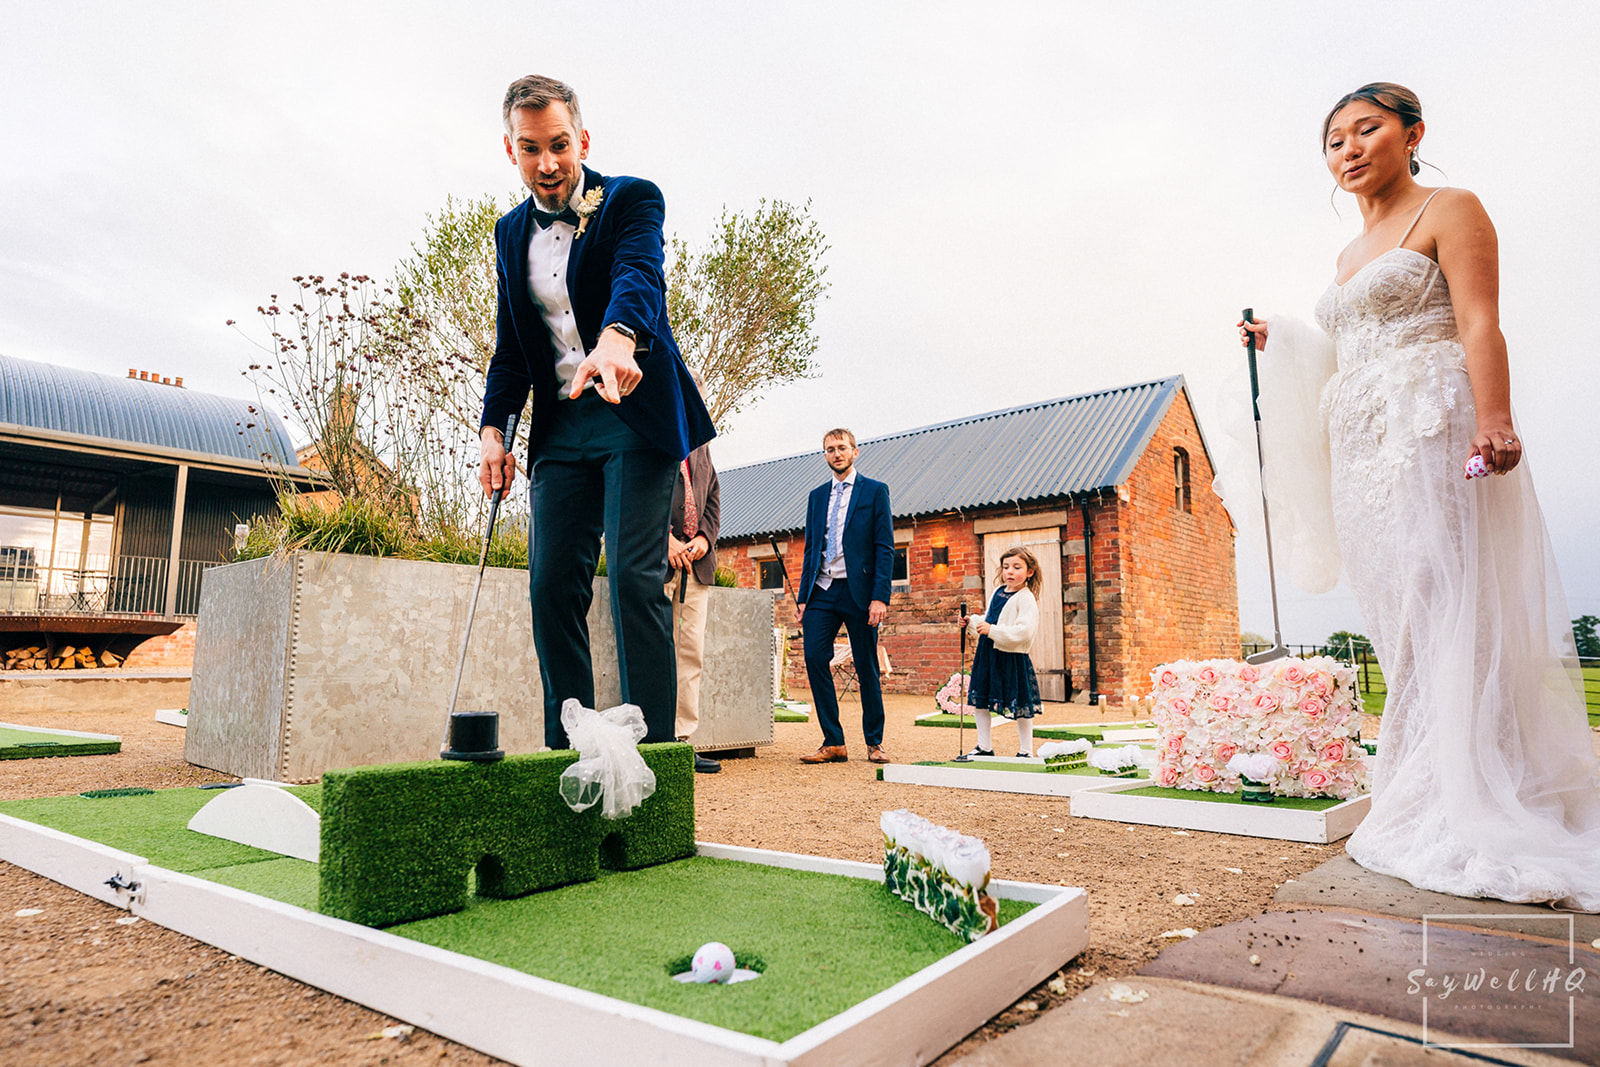 Documentary Wedding Photography Portfolio - Andy Saywell bride and groom playing golf at their wedding